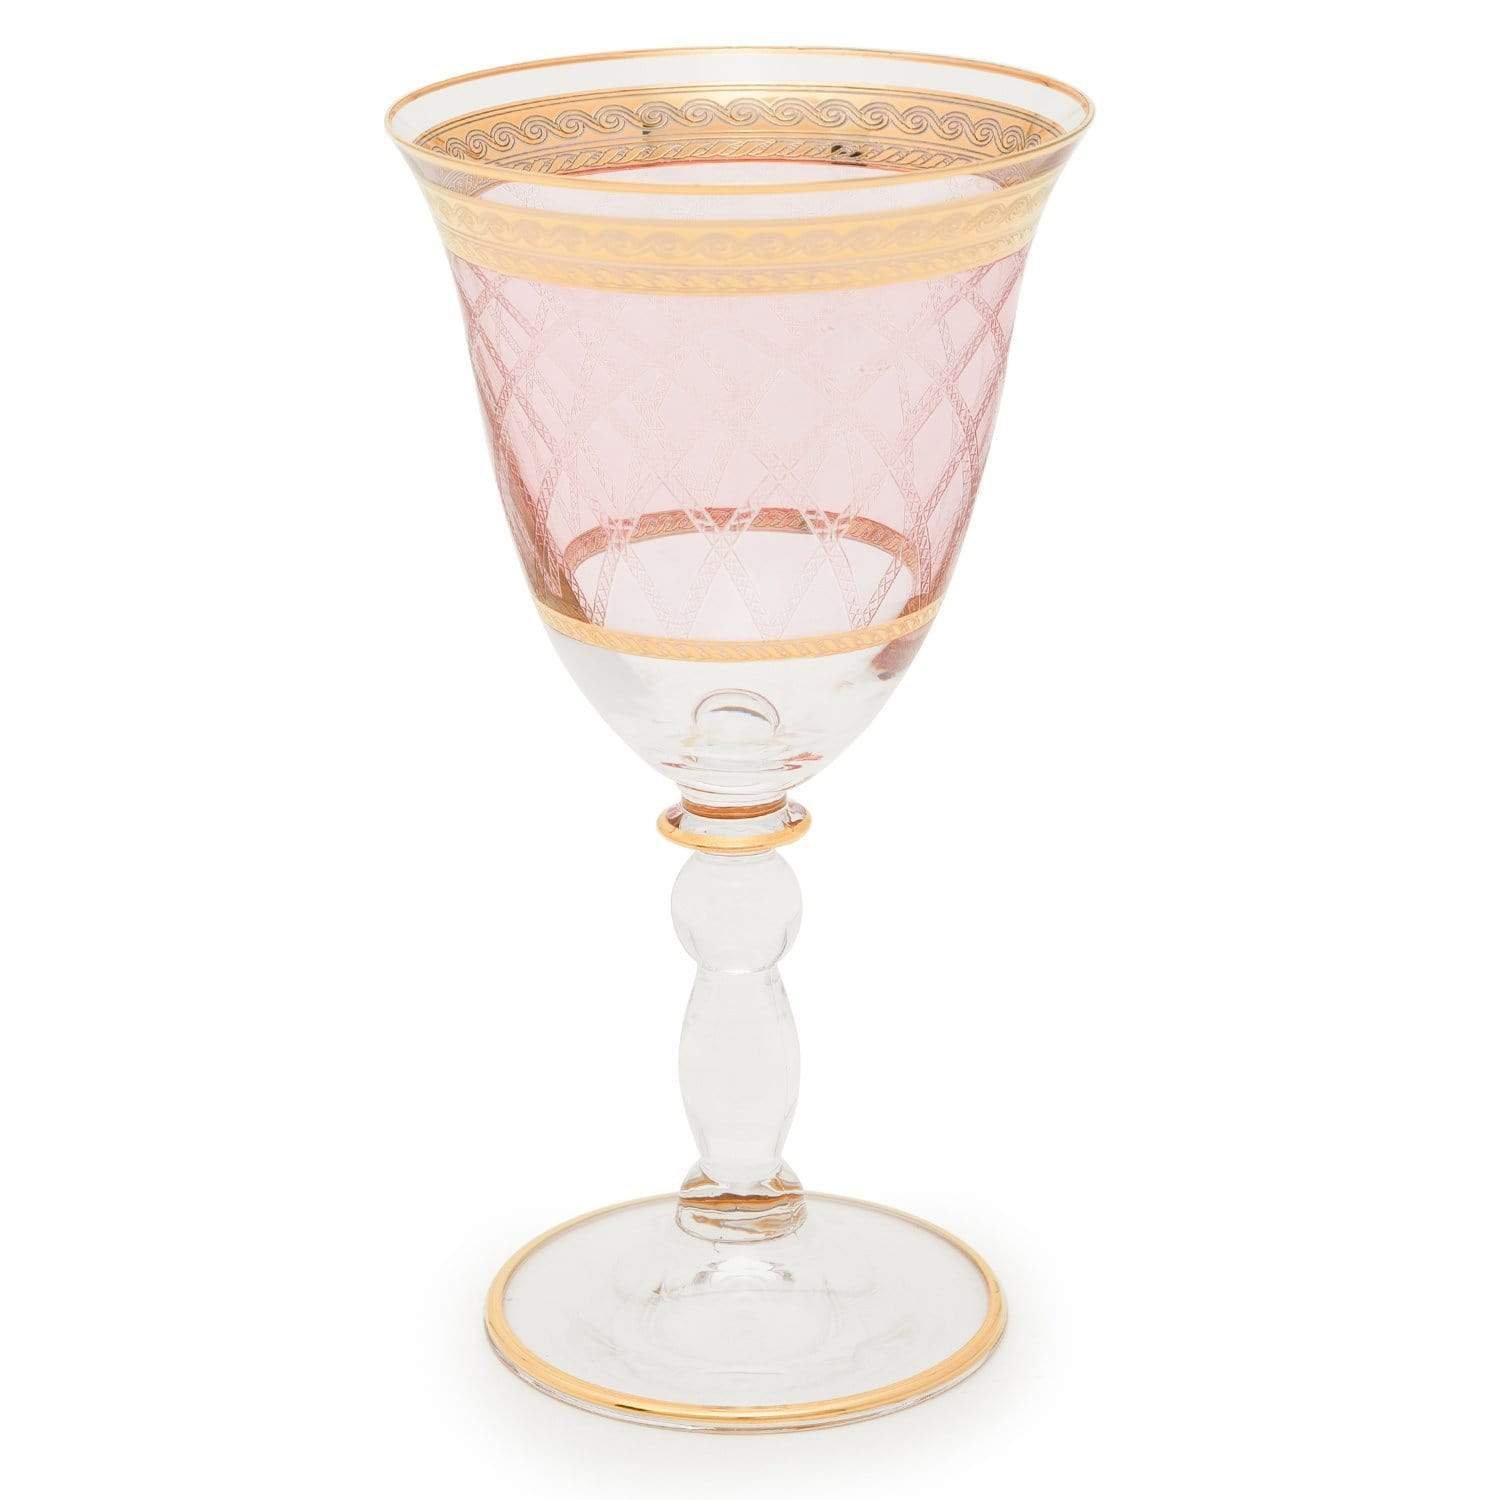 Combi Kolleen Goblet Set - Gold and Pink, 190 ml, Small, 6 Piece - G761Z/97 - Jashanmal Home